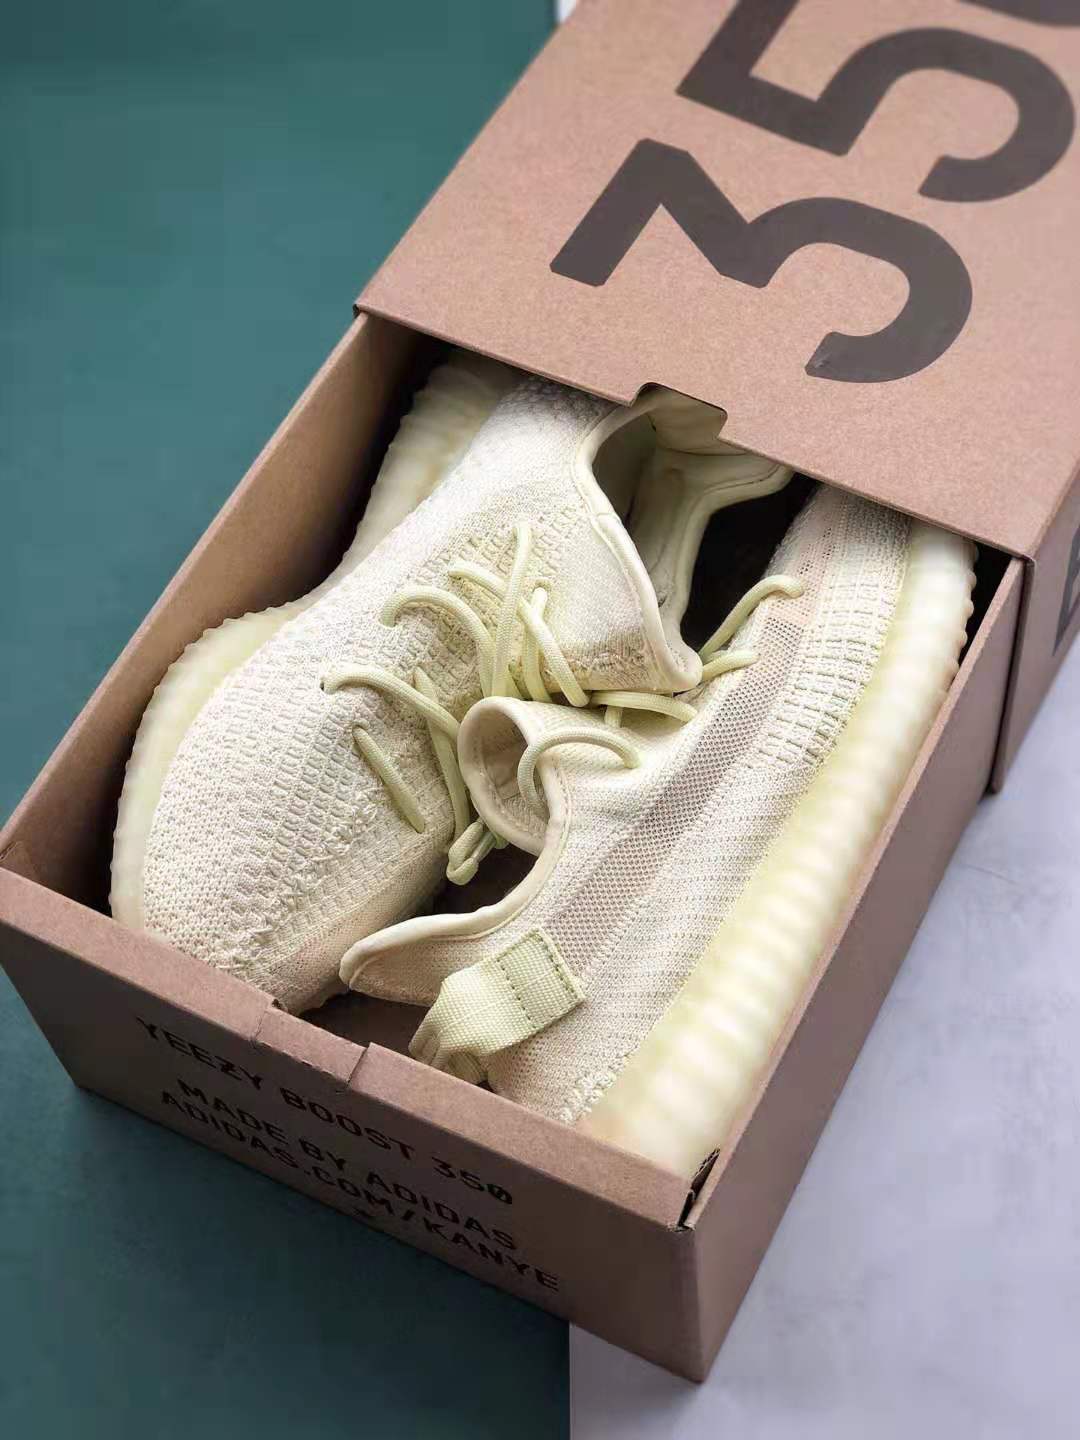 Adidas Yeezy Boost 350 V2 Synth F36981 | Latest Release | Shop Now